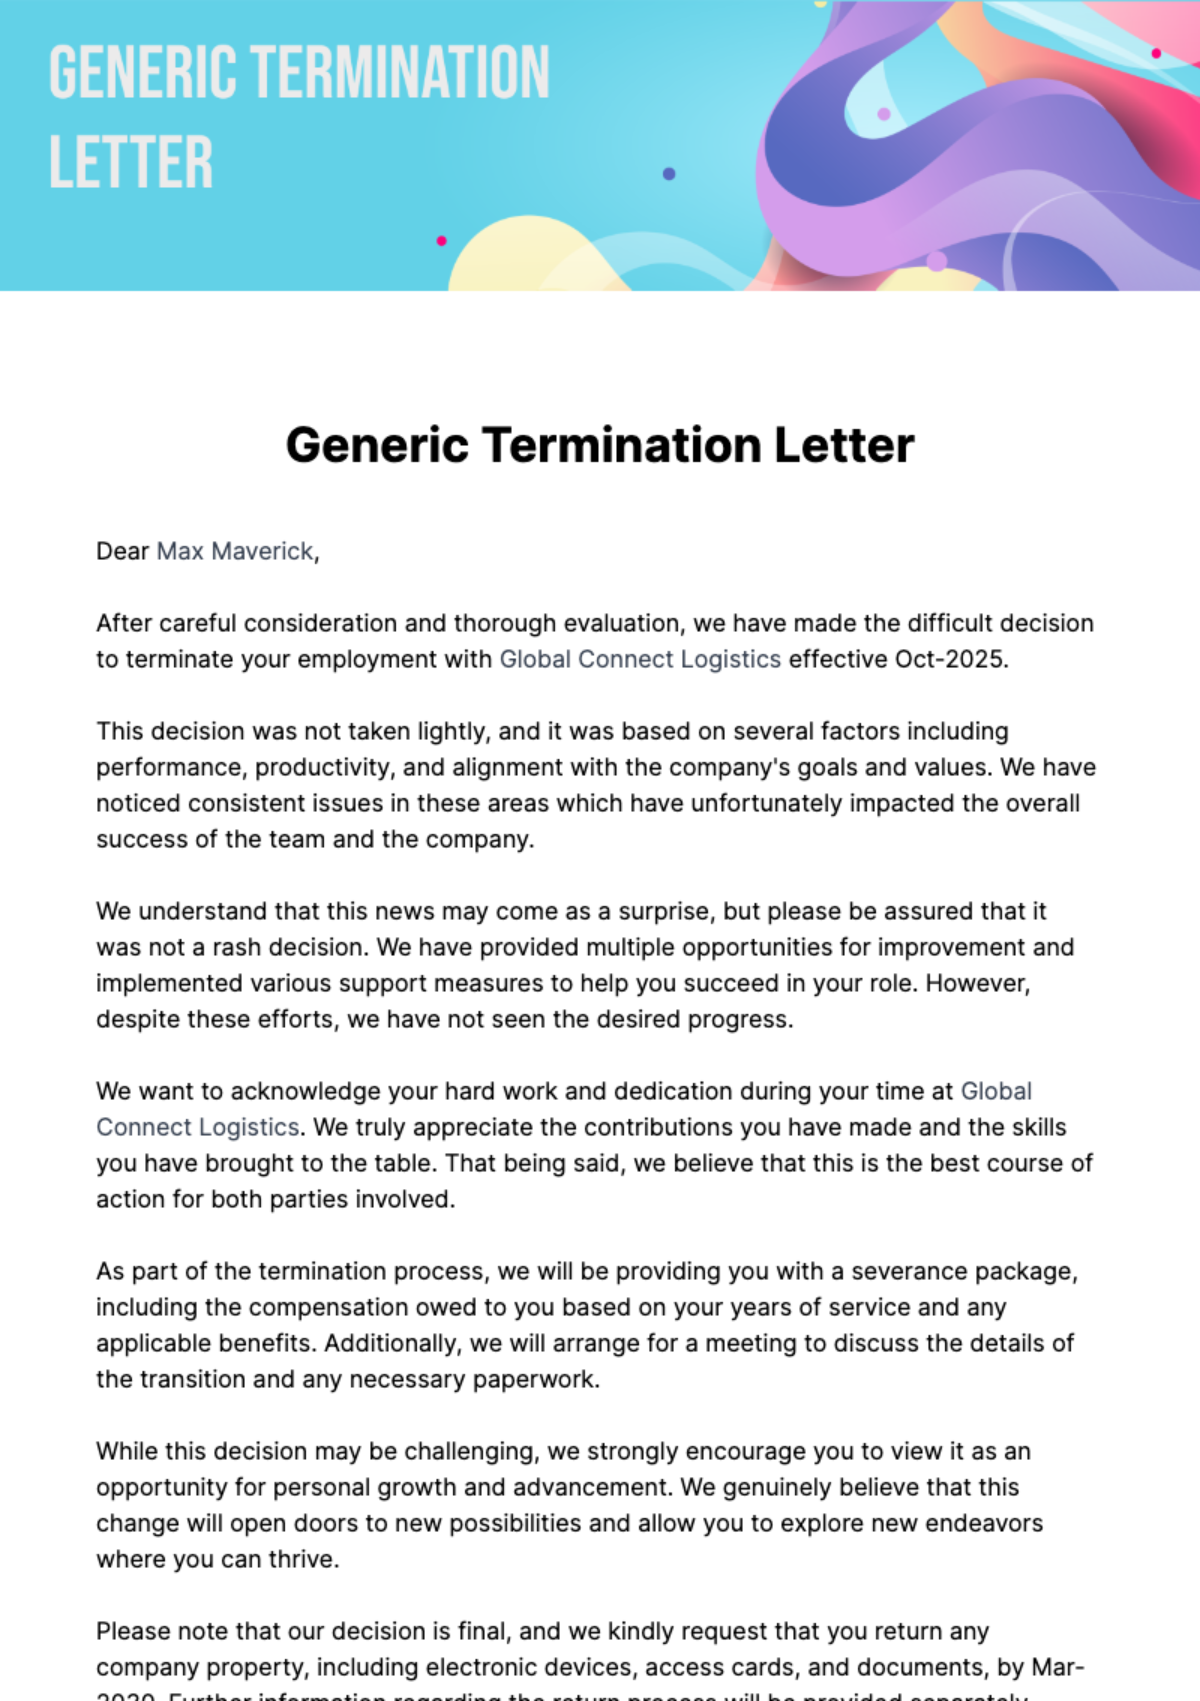 Generic Termination Letter Template